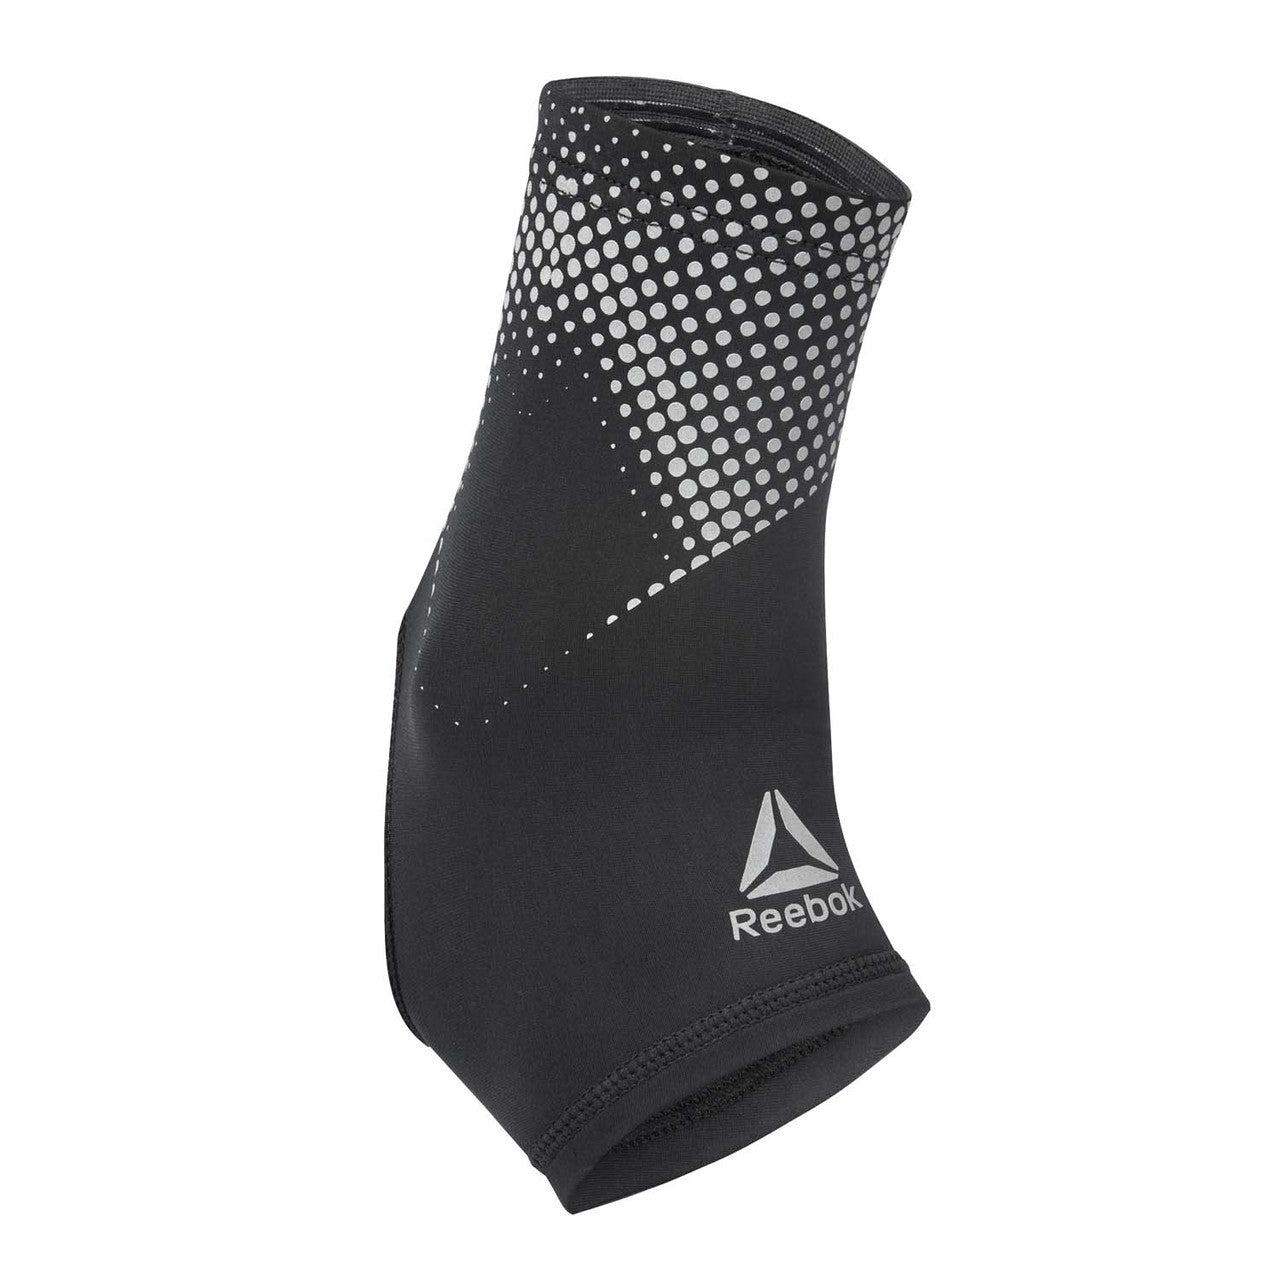 Men's Injury Supports; Ankle, Knee, Wrist & Elbow Supports